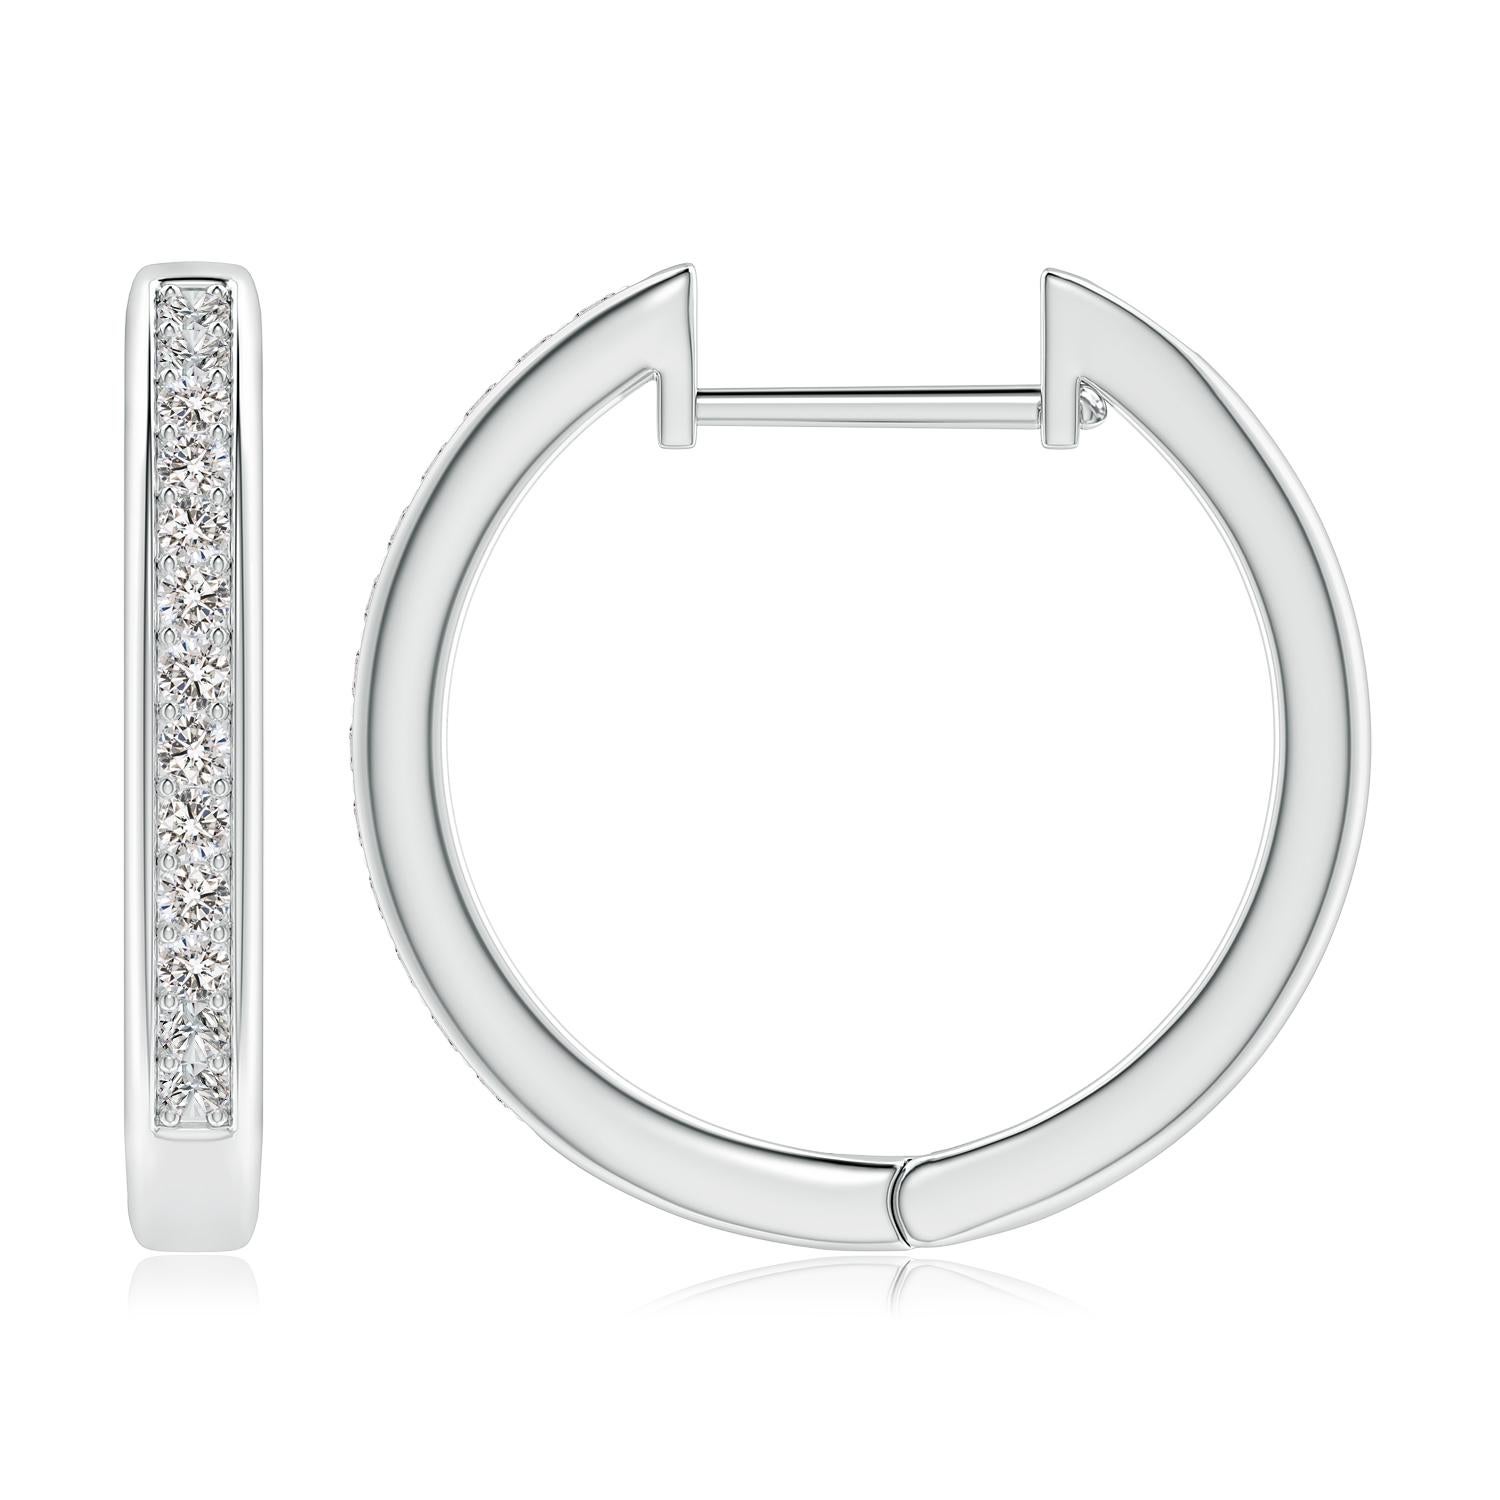 Round Cut Natural Diamond Hoop Earrings in 14K White Gold (0.5cttw Color-I-J Clarity-I1I2) For Sale